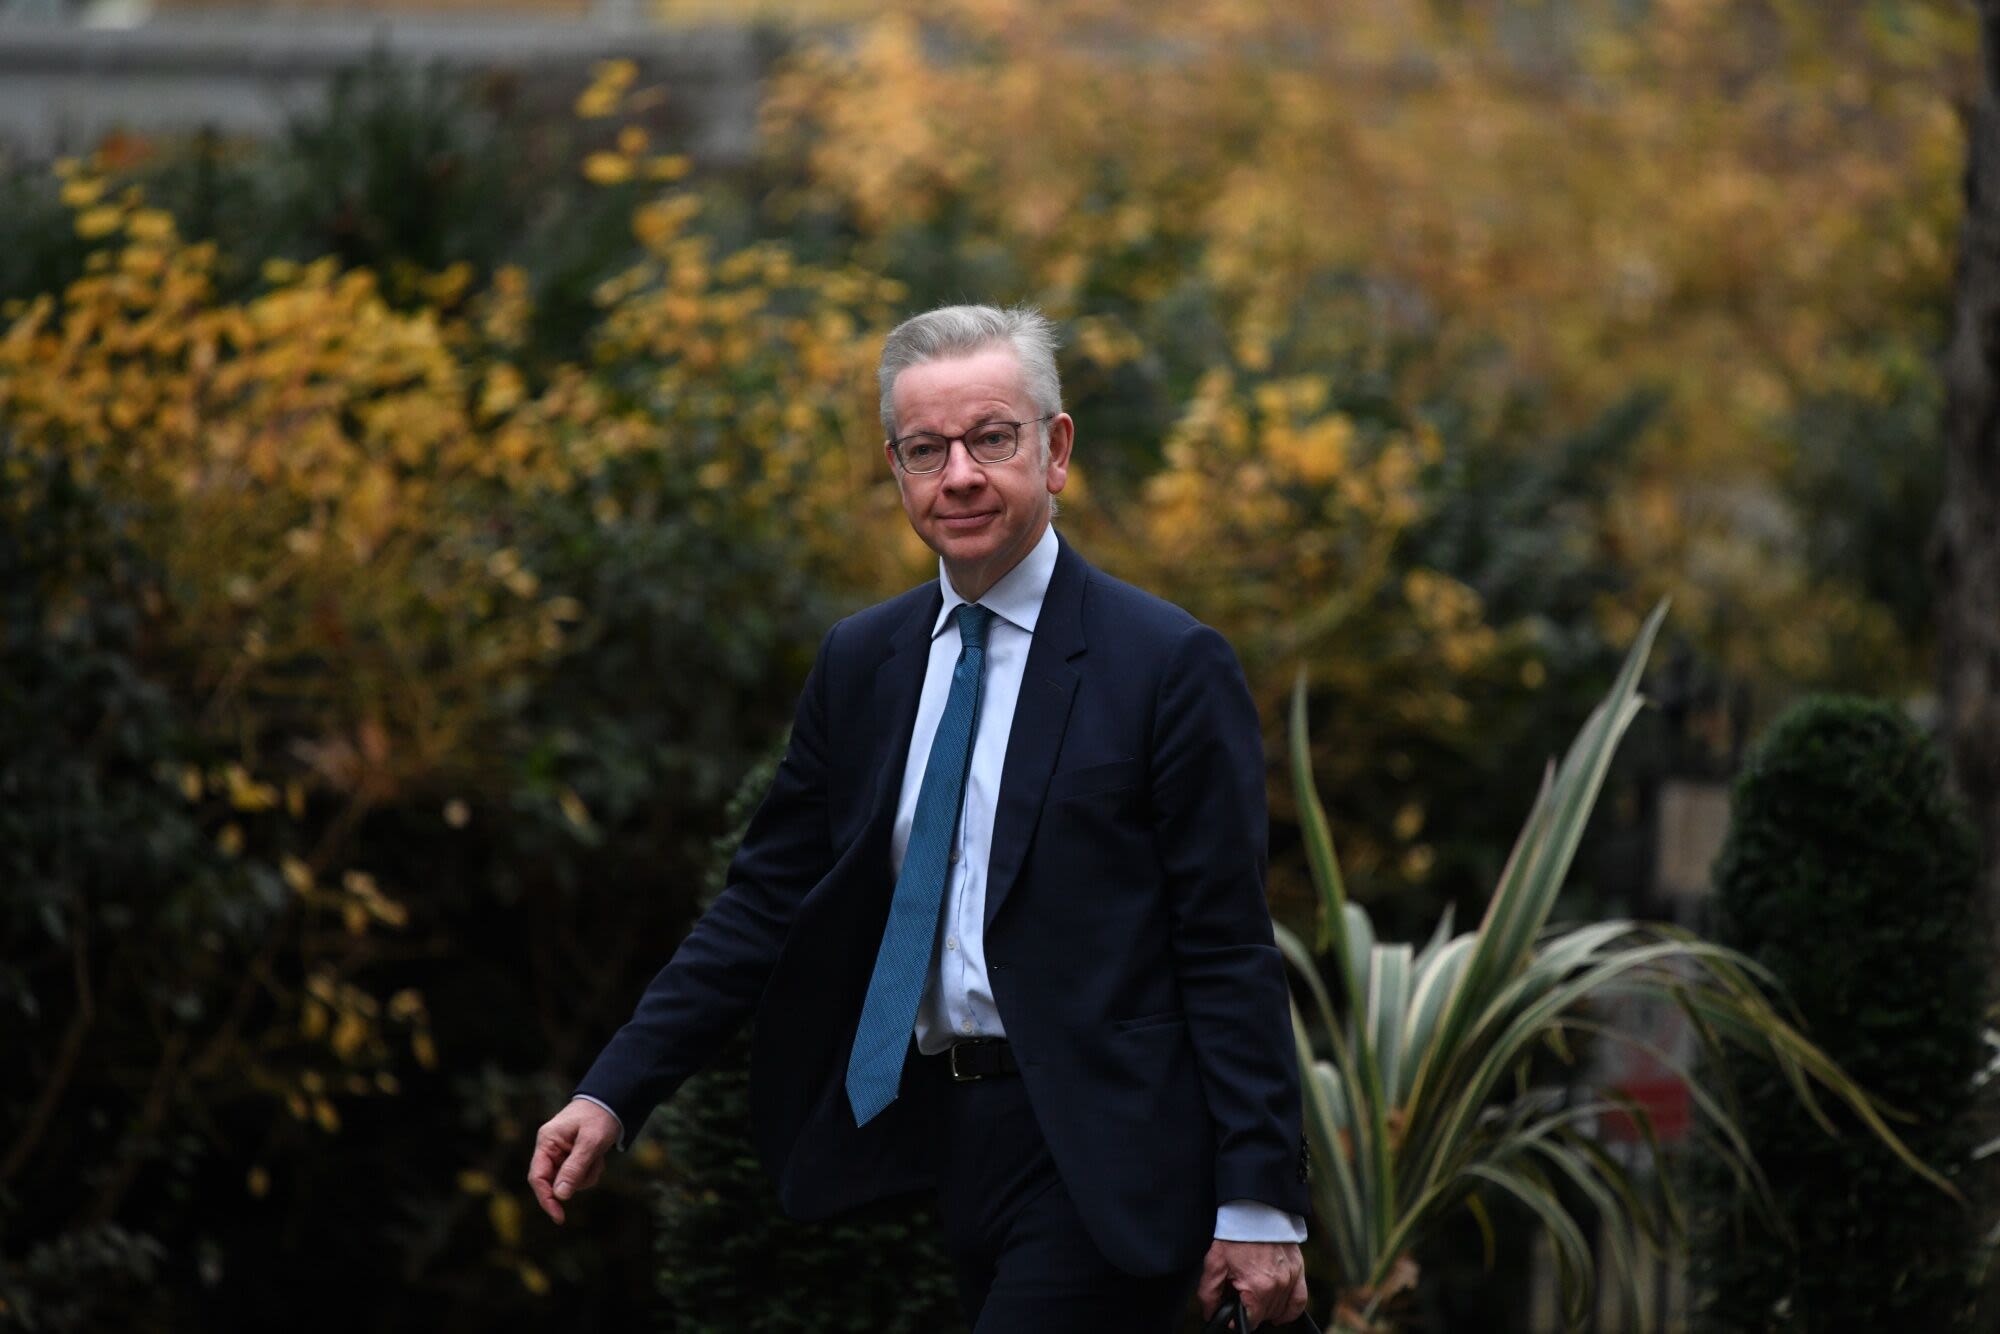 Cabinet Minister Gove Joins Tory Exodus Before UK Election